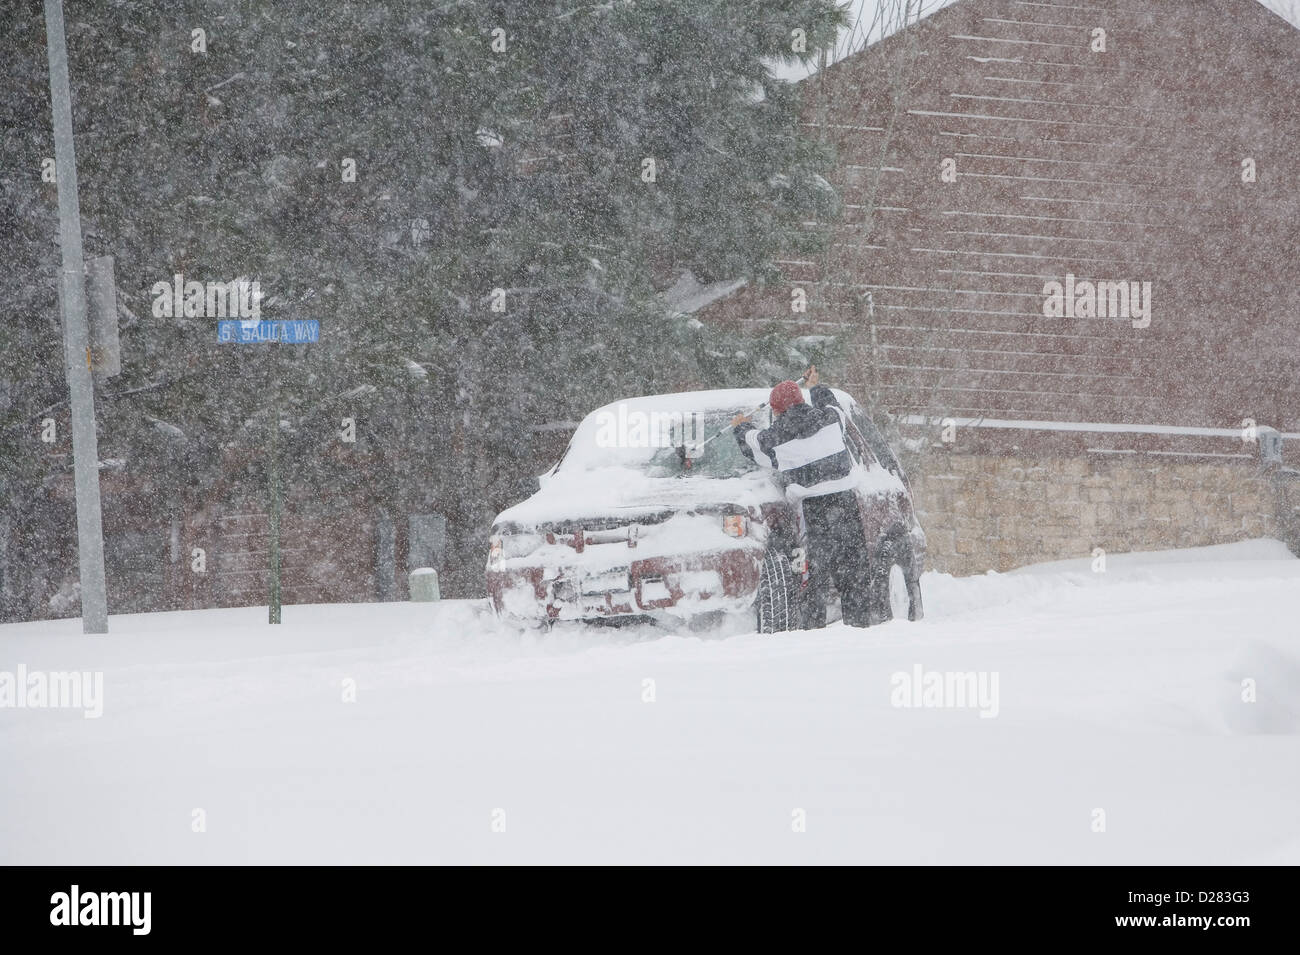 Man cleans windshield during winter blizzard Stock Photo